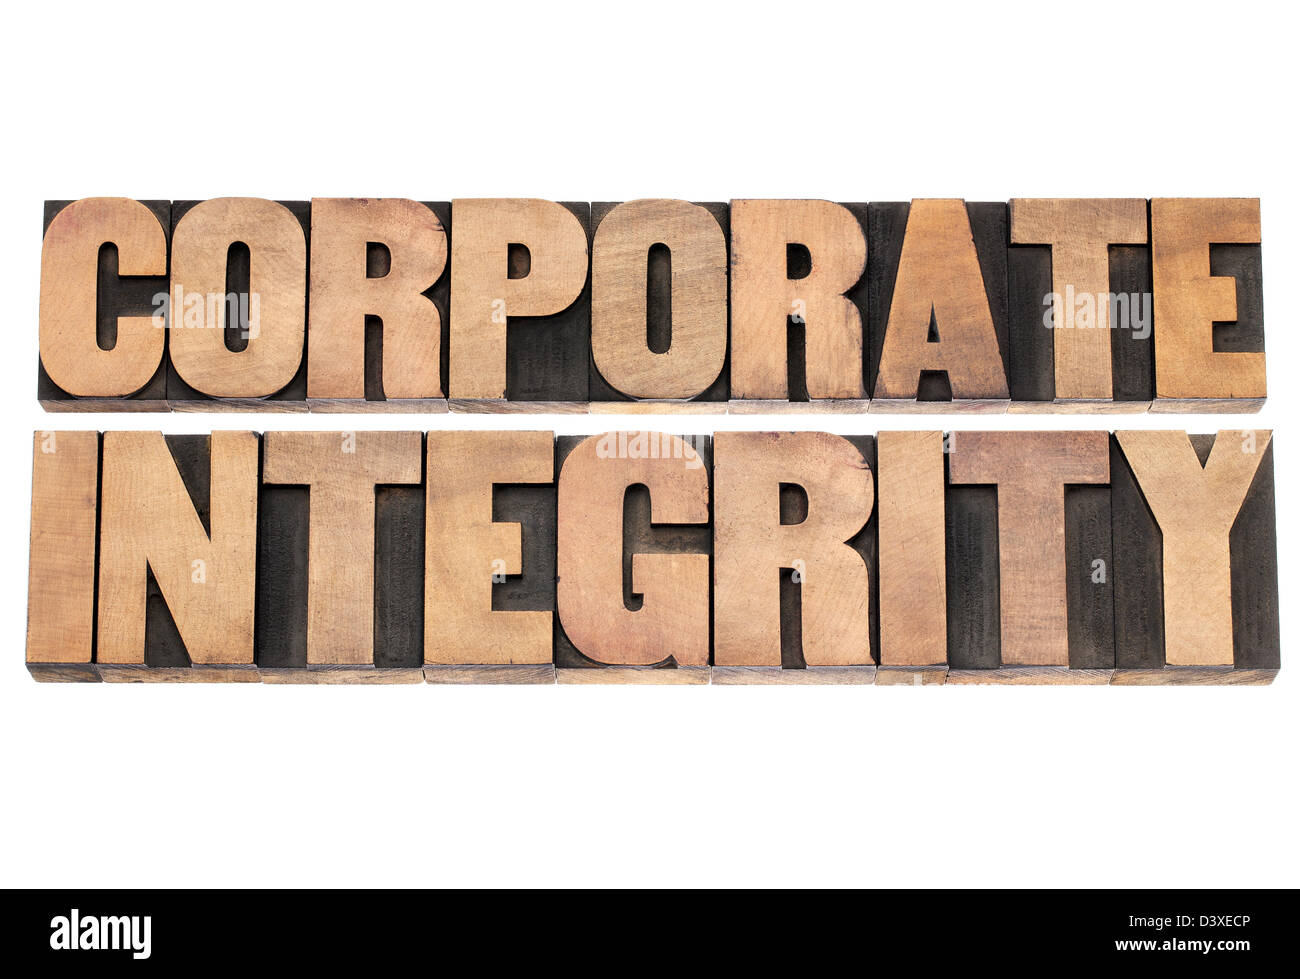 corporate integrity - business ethics concept - isolated text in vintage letterpress wood type printing blocks Stock Photo